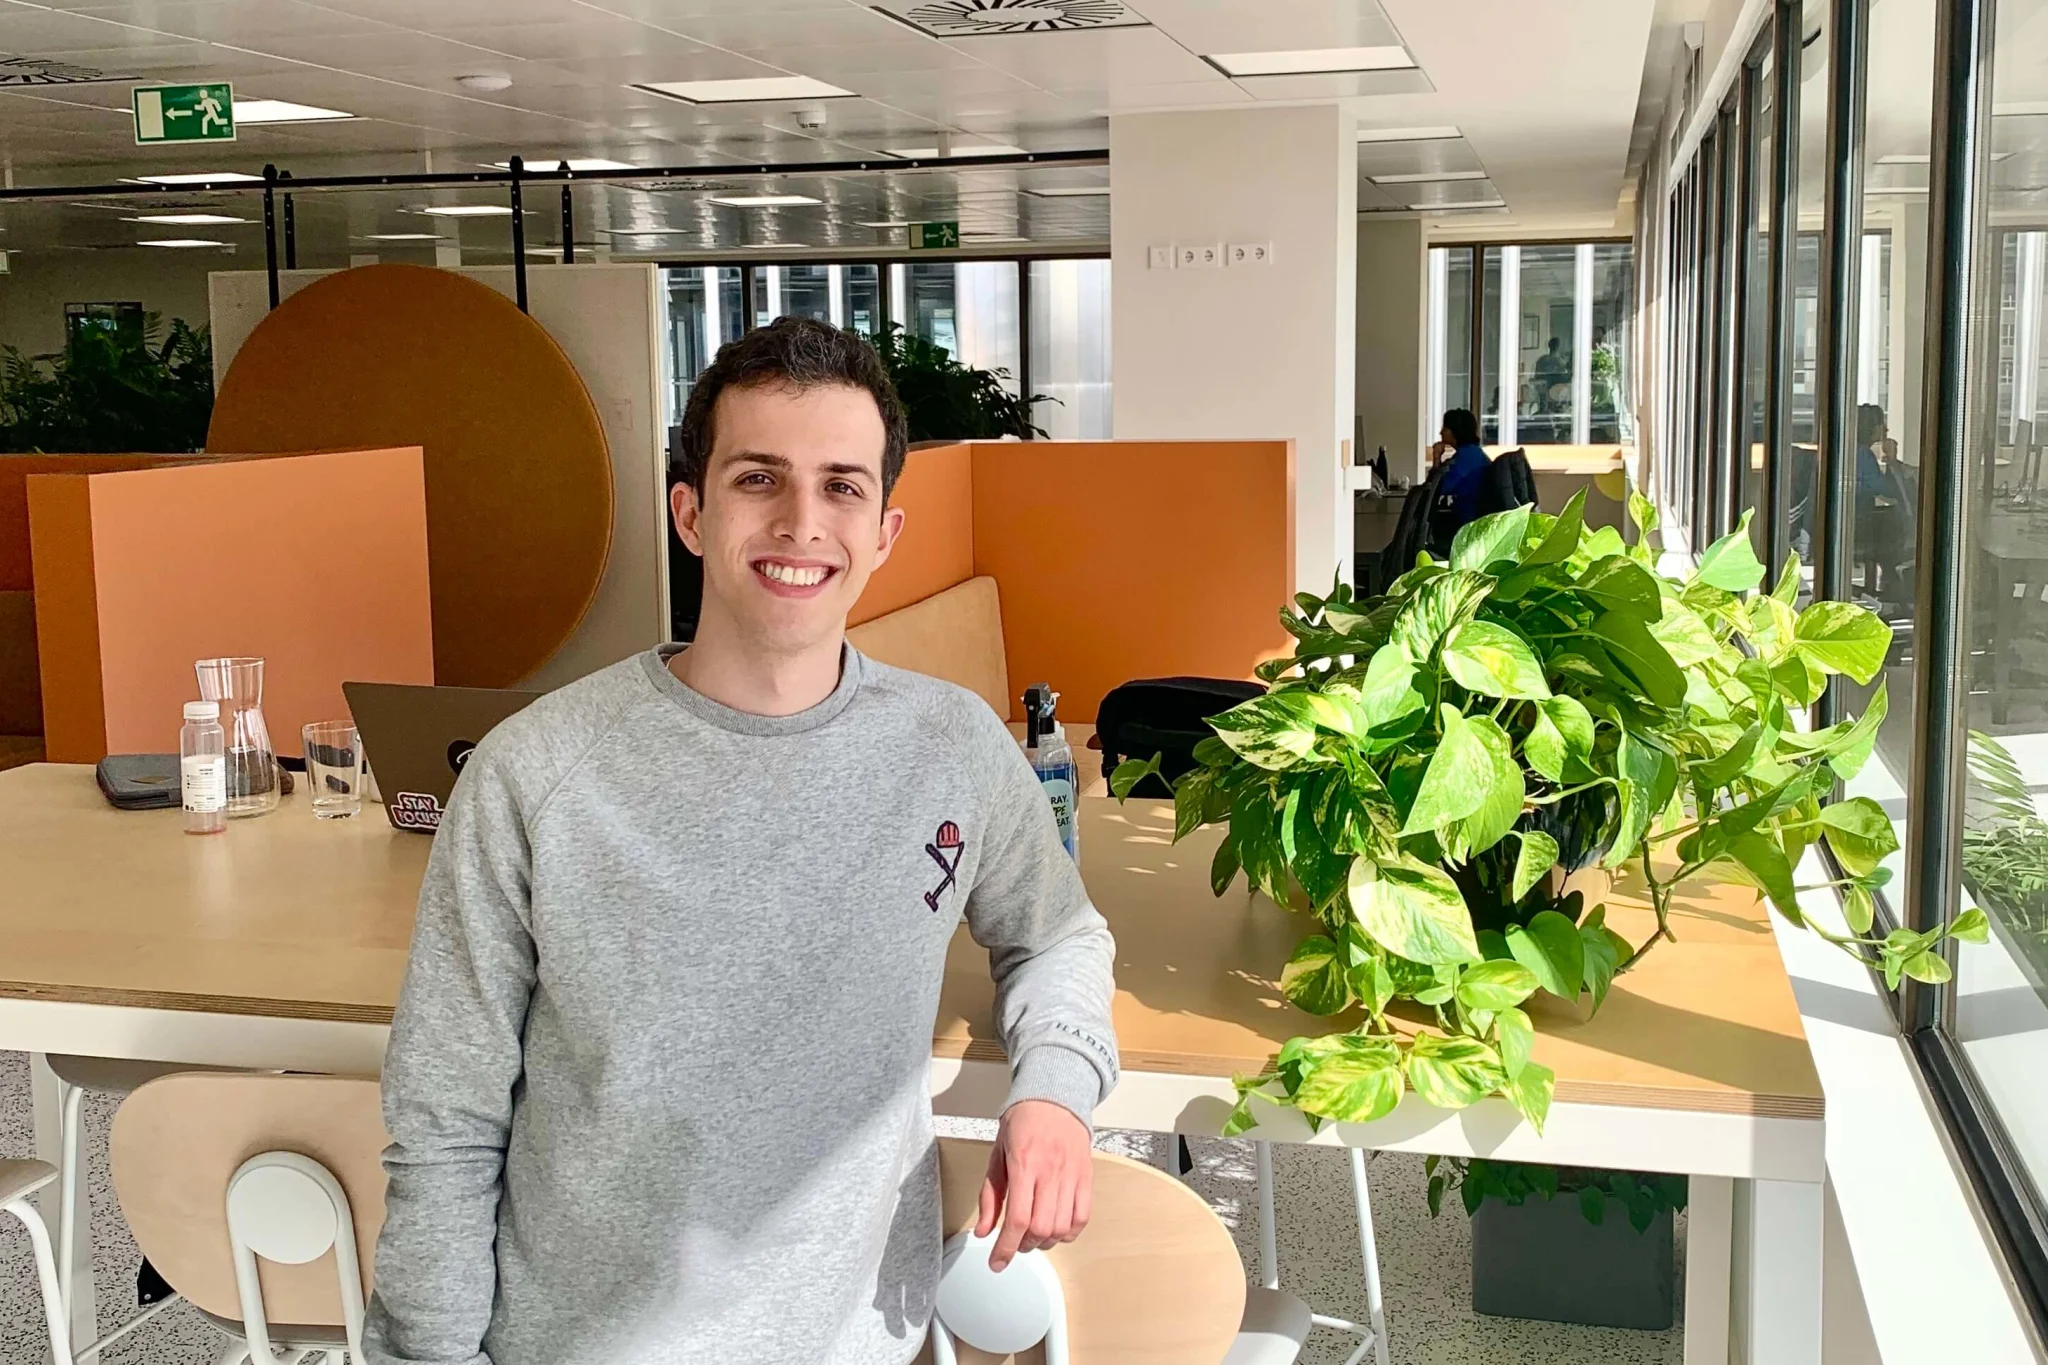 A Day in the Life of Miguel, Backend Engineer at Personio